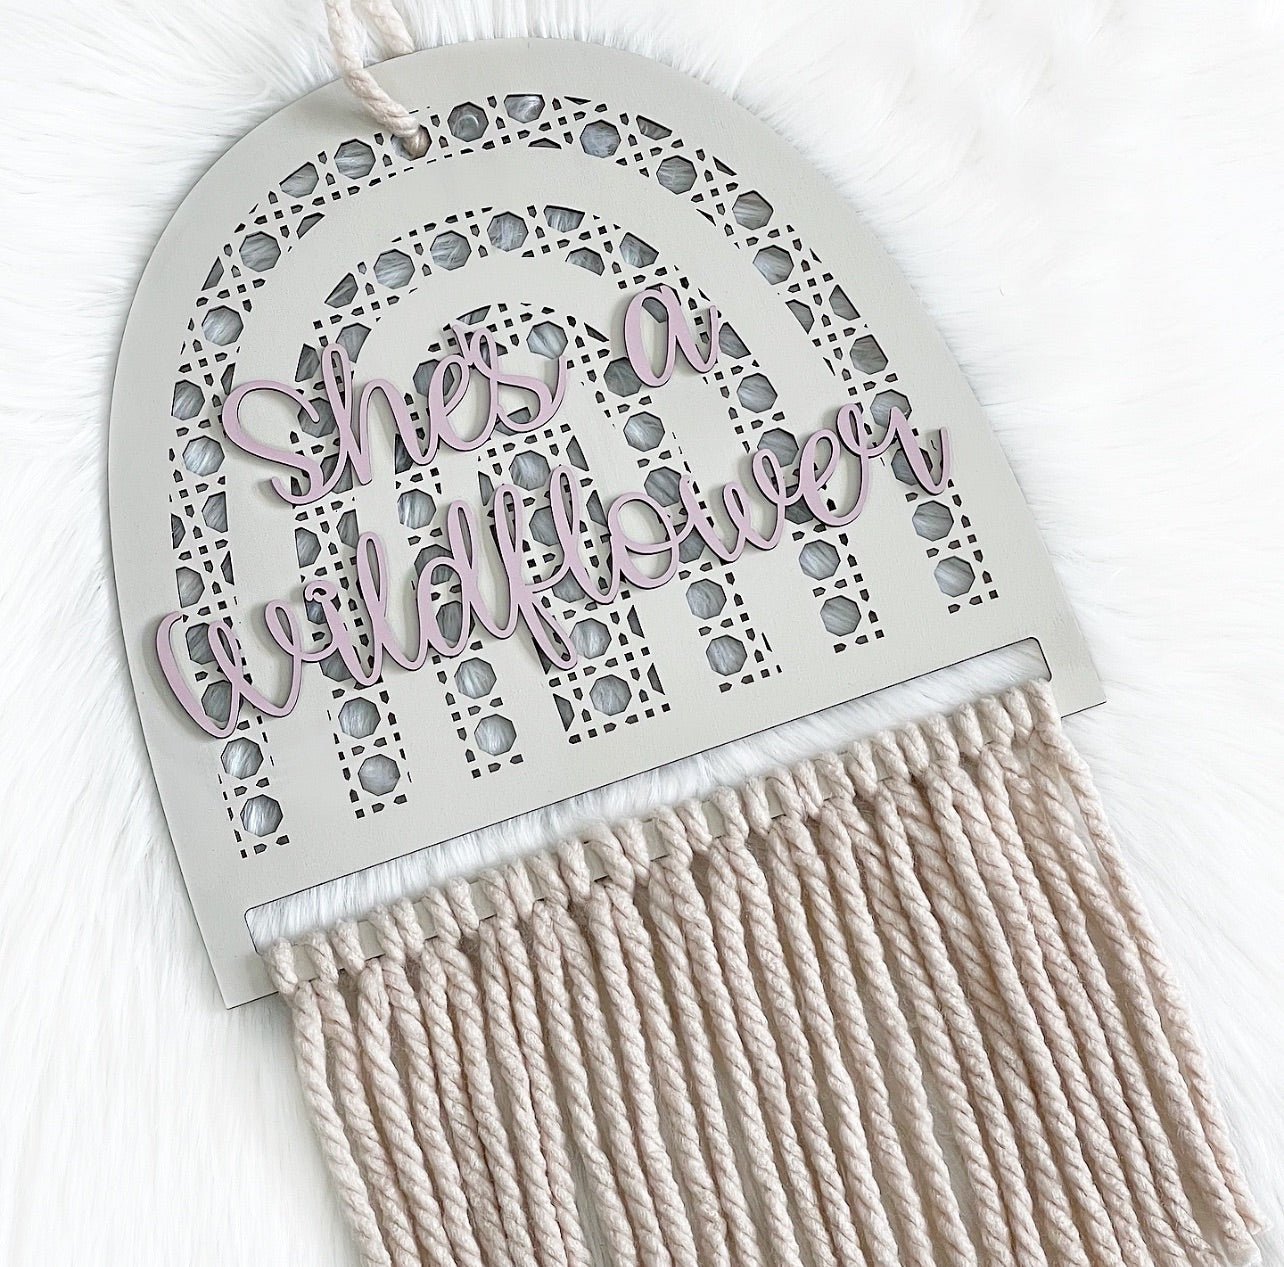 Rattan Wall Hanging - Cute as a Button by Laura